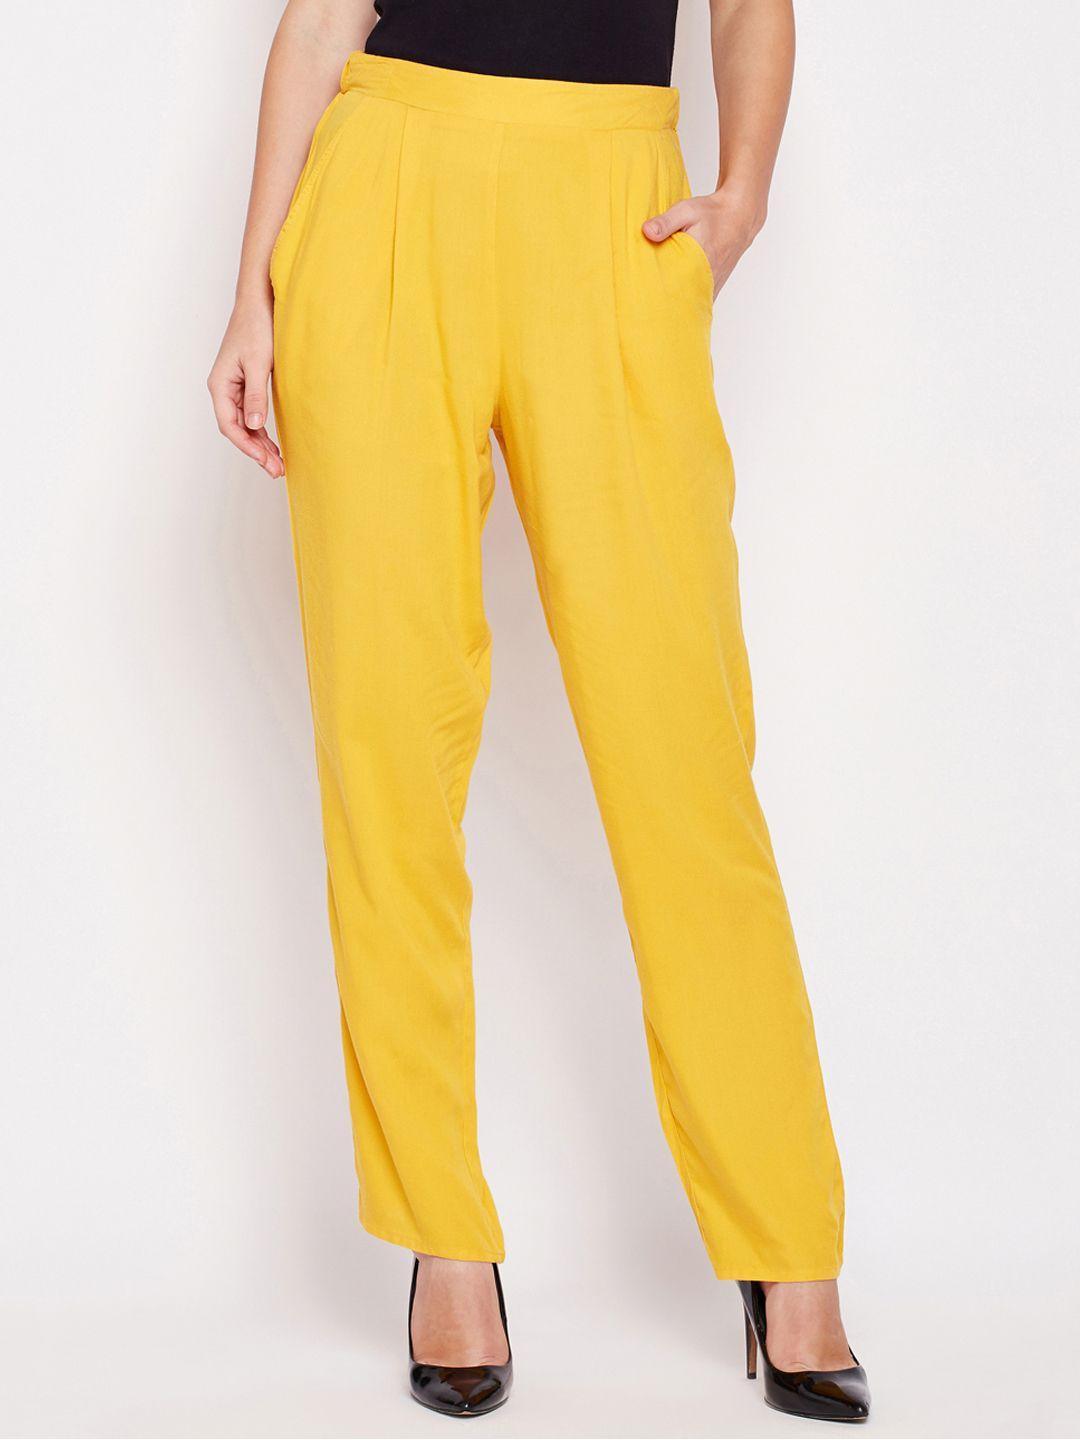 oxolloxo women yellow solid regular fit peg trousers